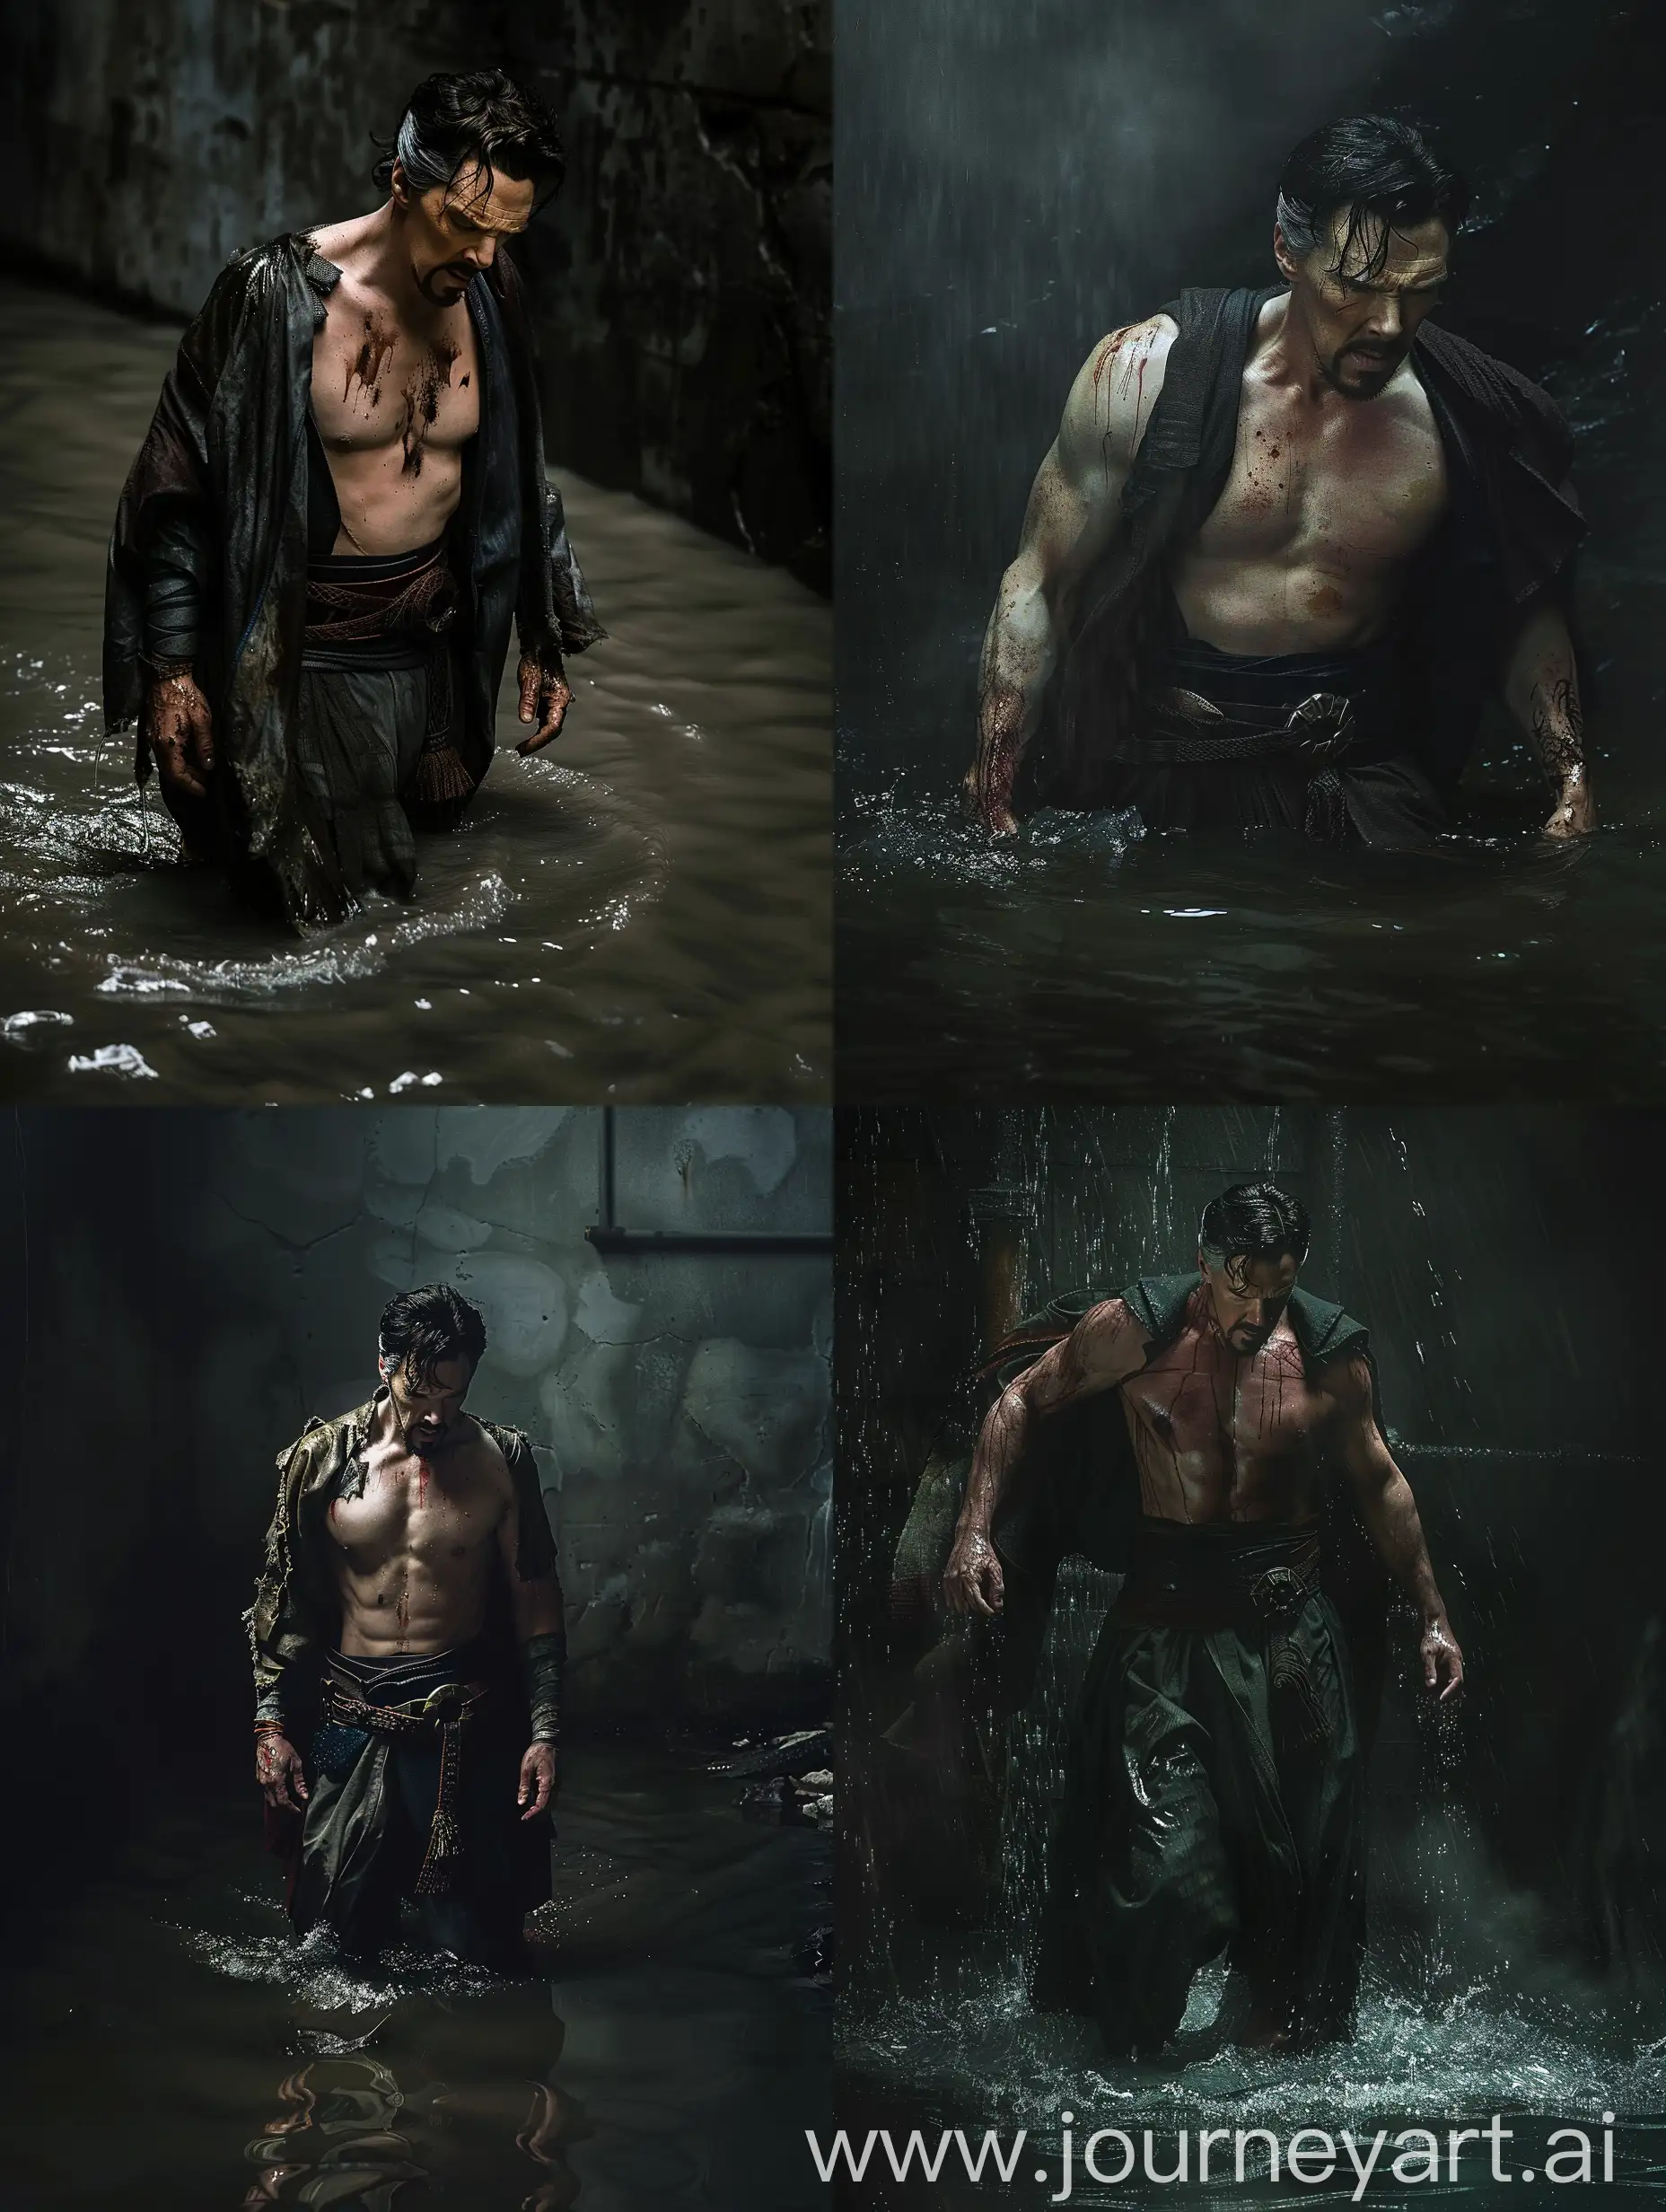 Doctor Strange in ripped, torn, ragged, dirty outfit, shirtless, in a dark room, water rising to his knees, wet, in dispair.